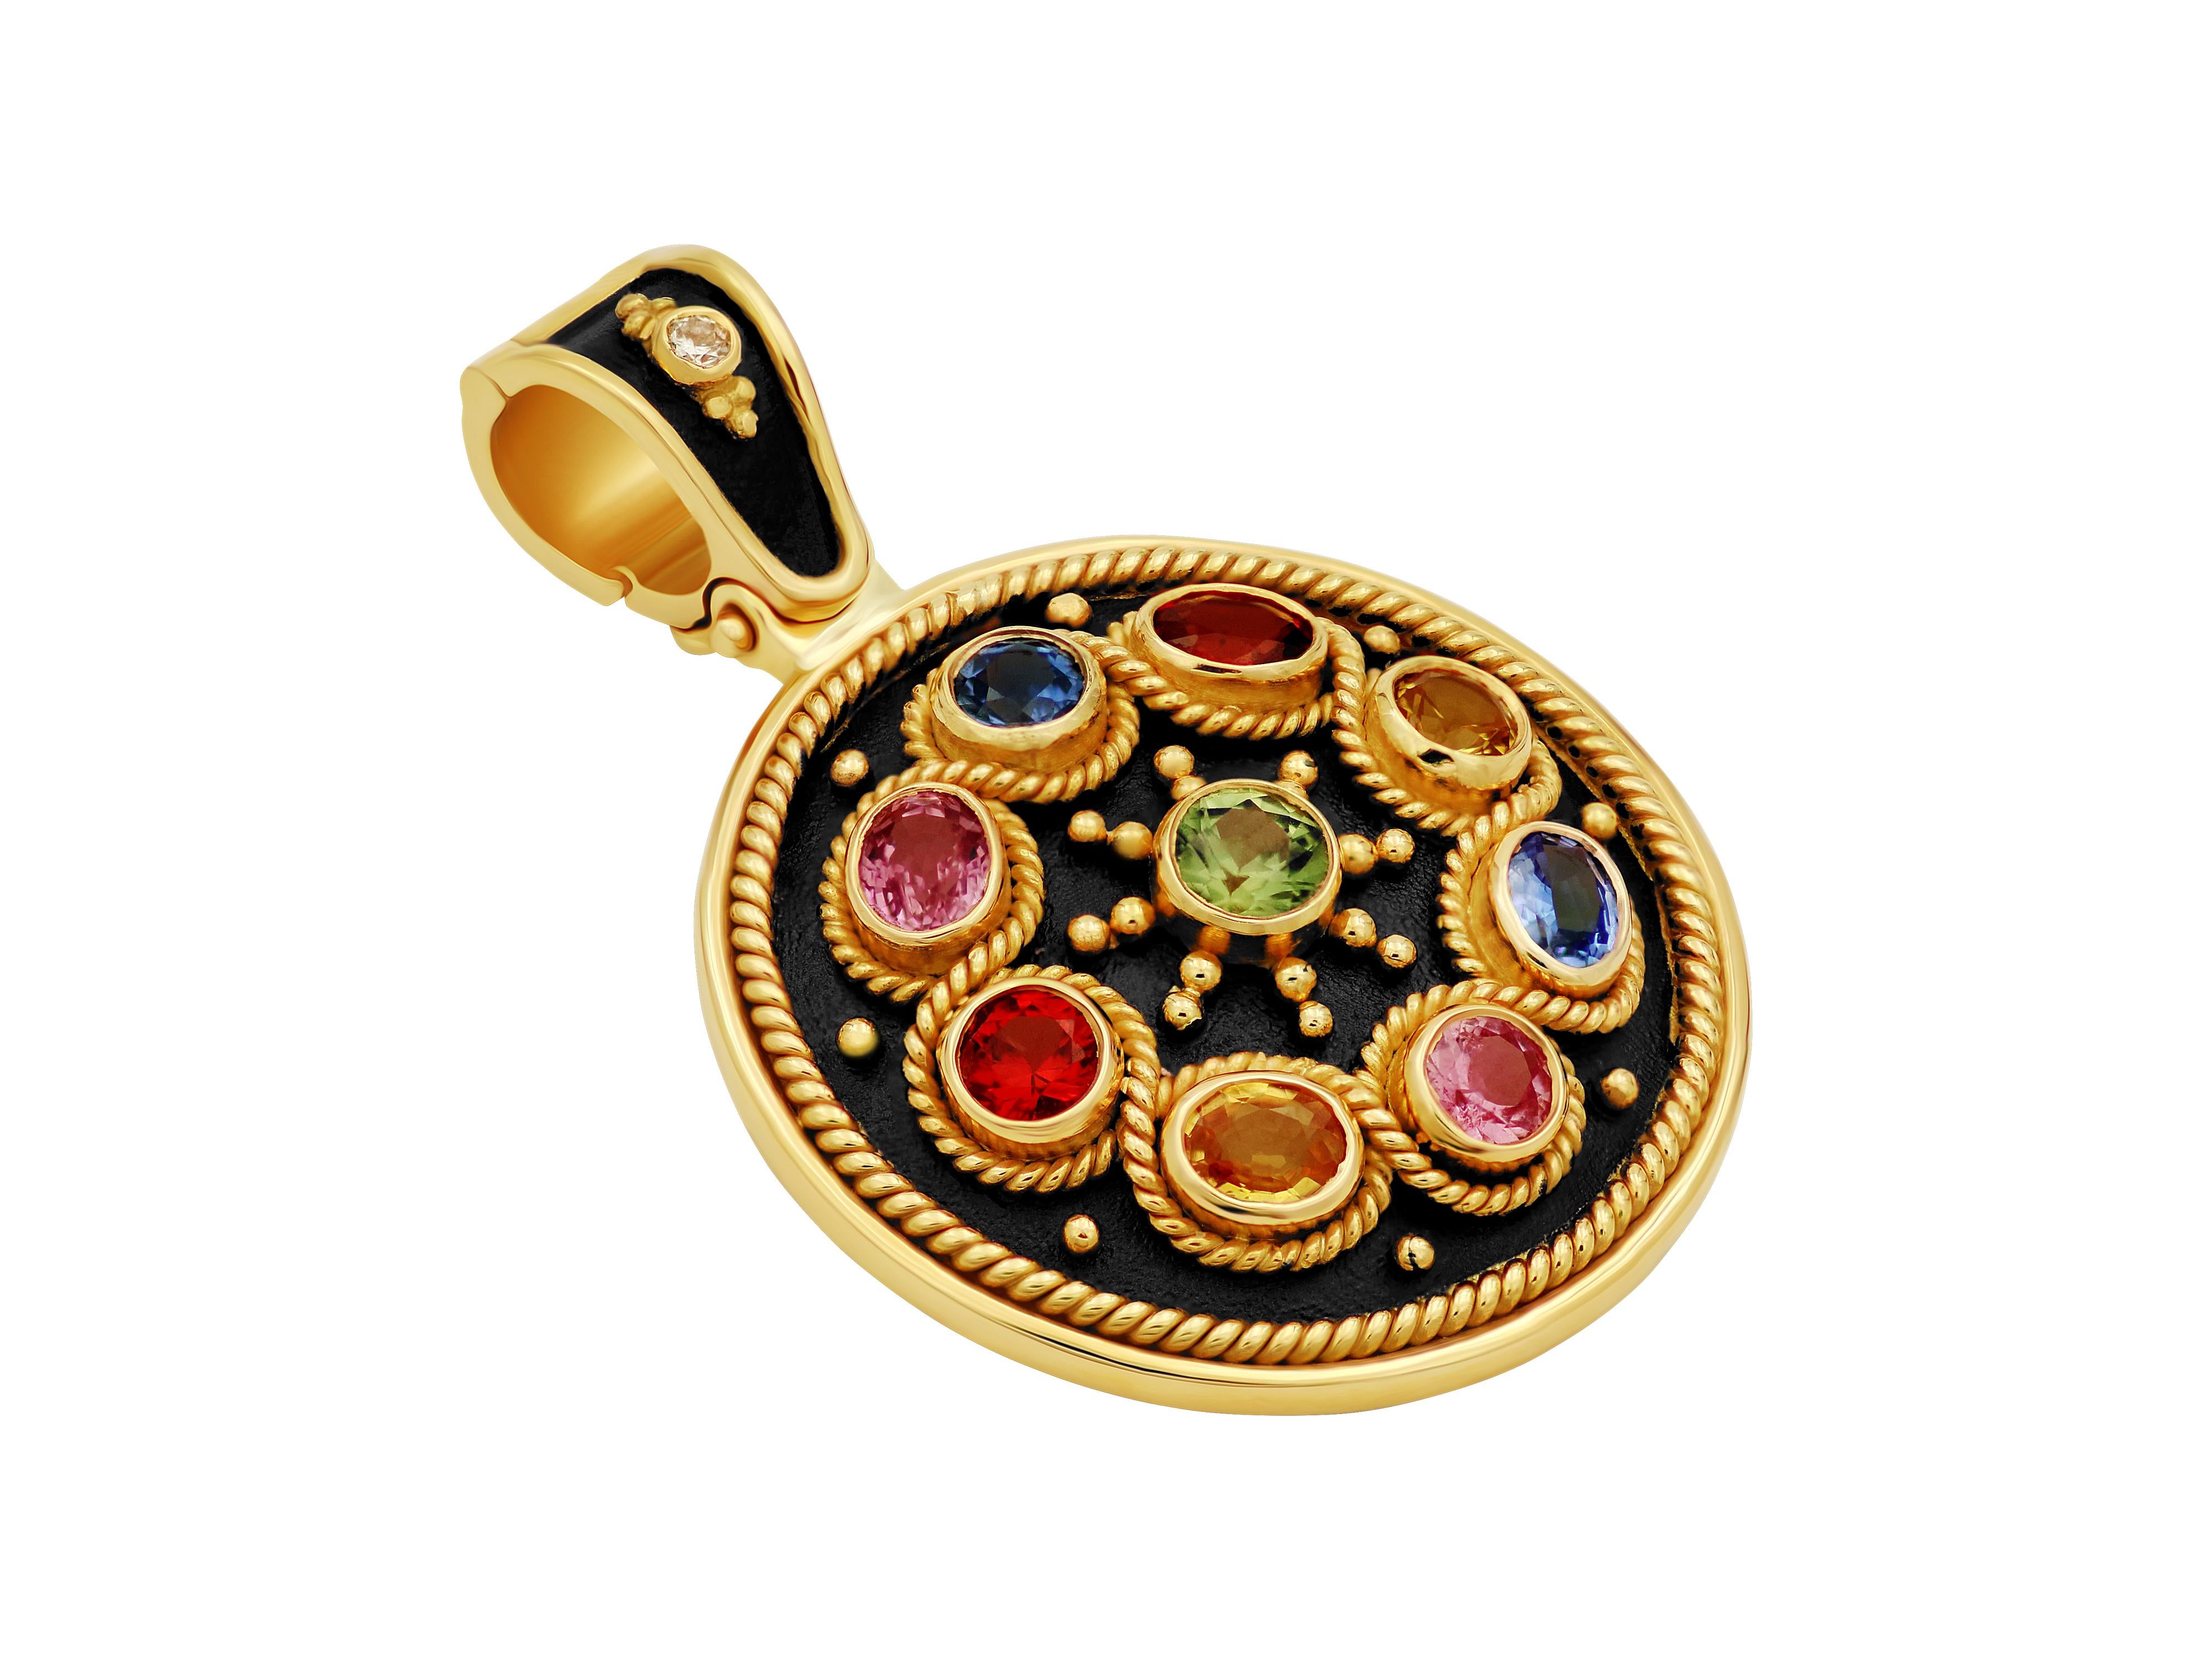 Colorful noir pendant in 18k yellow gold. Oval 0.77 carats sapphires in every color circle around this pendant with beautiful filigrees and granulation and black platinum background for high contrast. With our classic brilliant diamond decorated